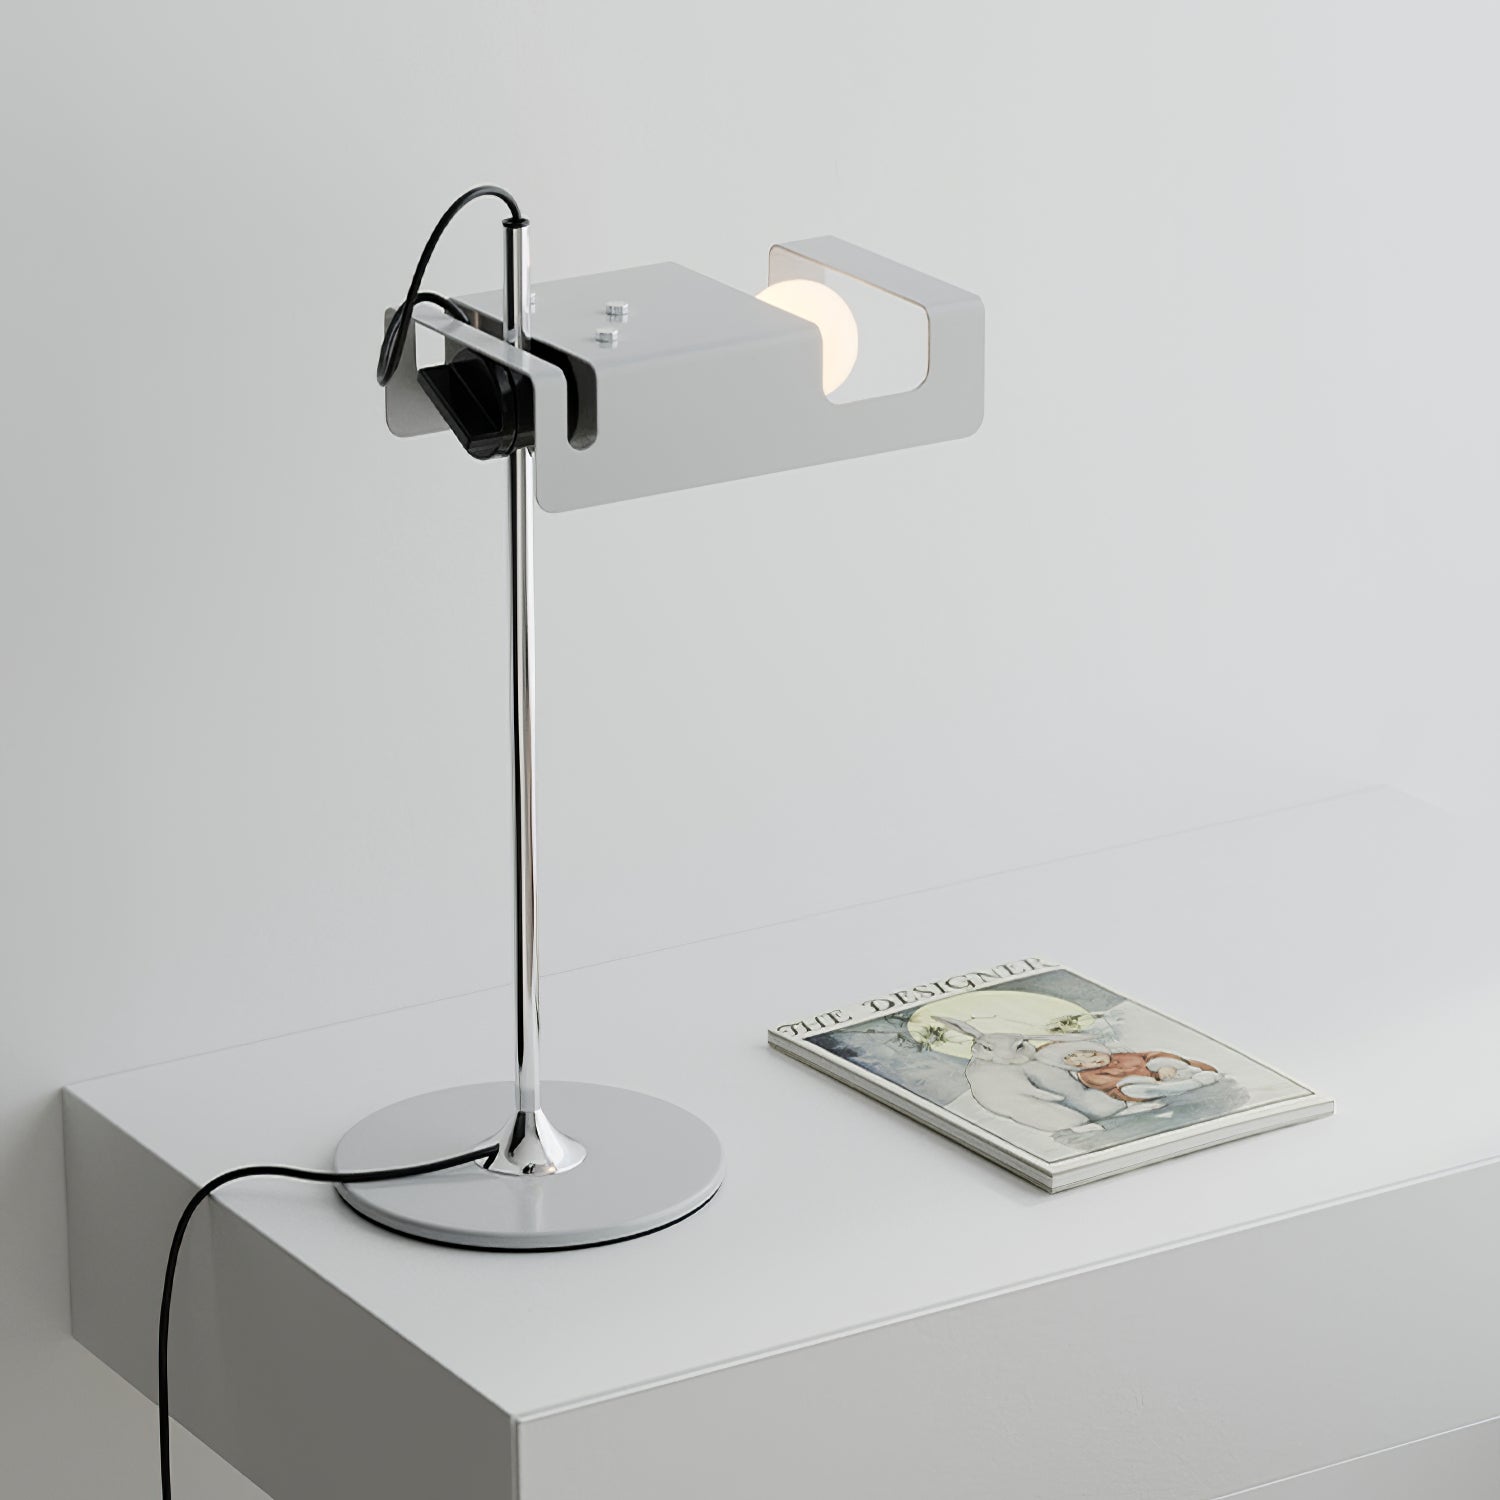 Spider Table Lamp